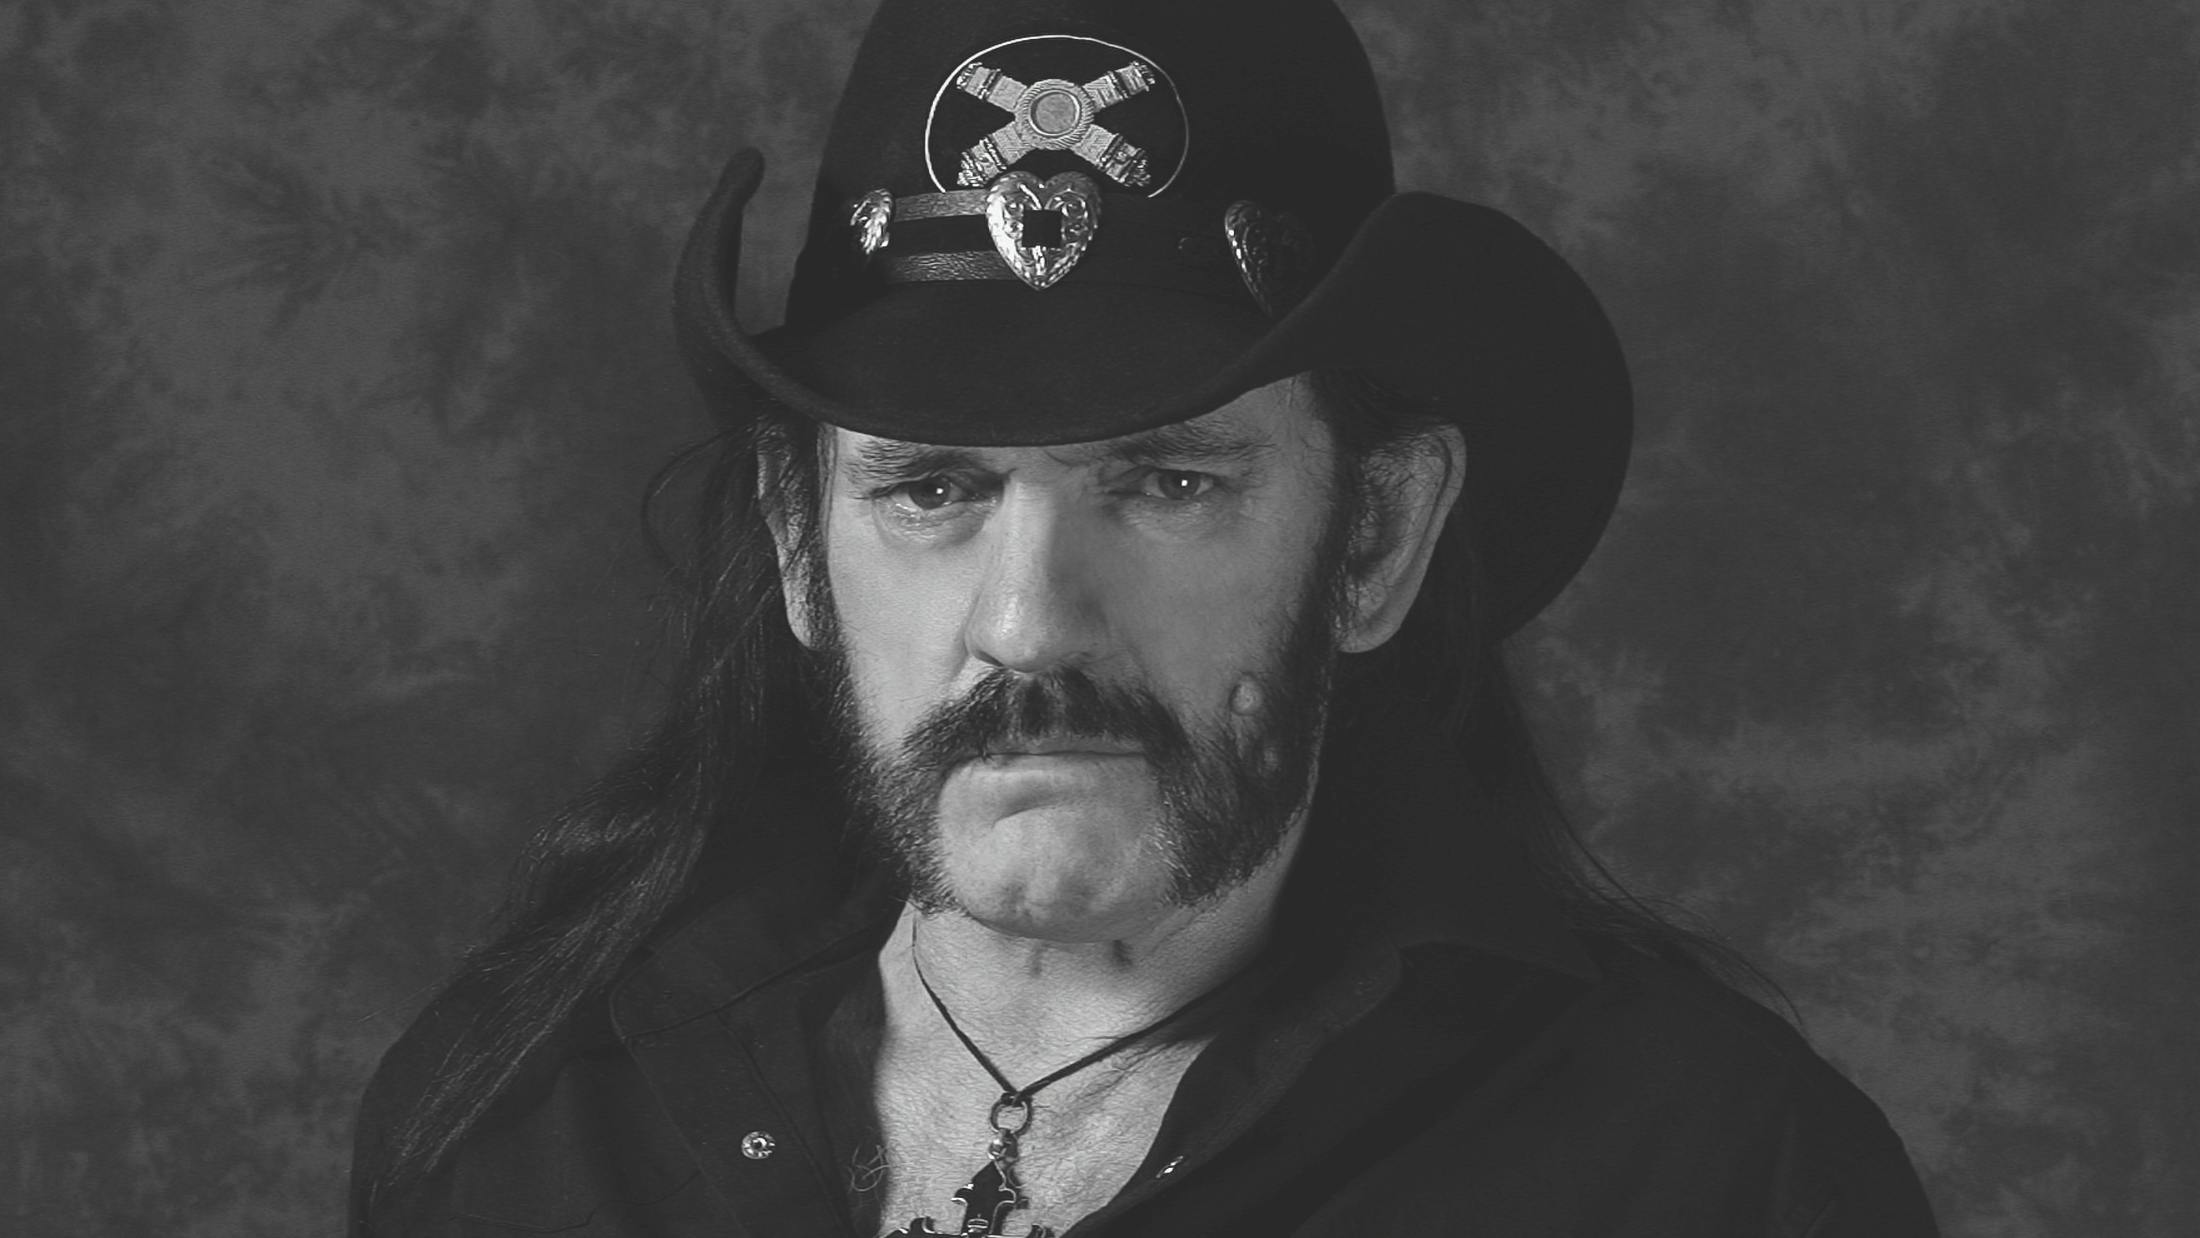 Lemmy's ashes were placed in bullets and sent to his closest friends